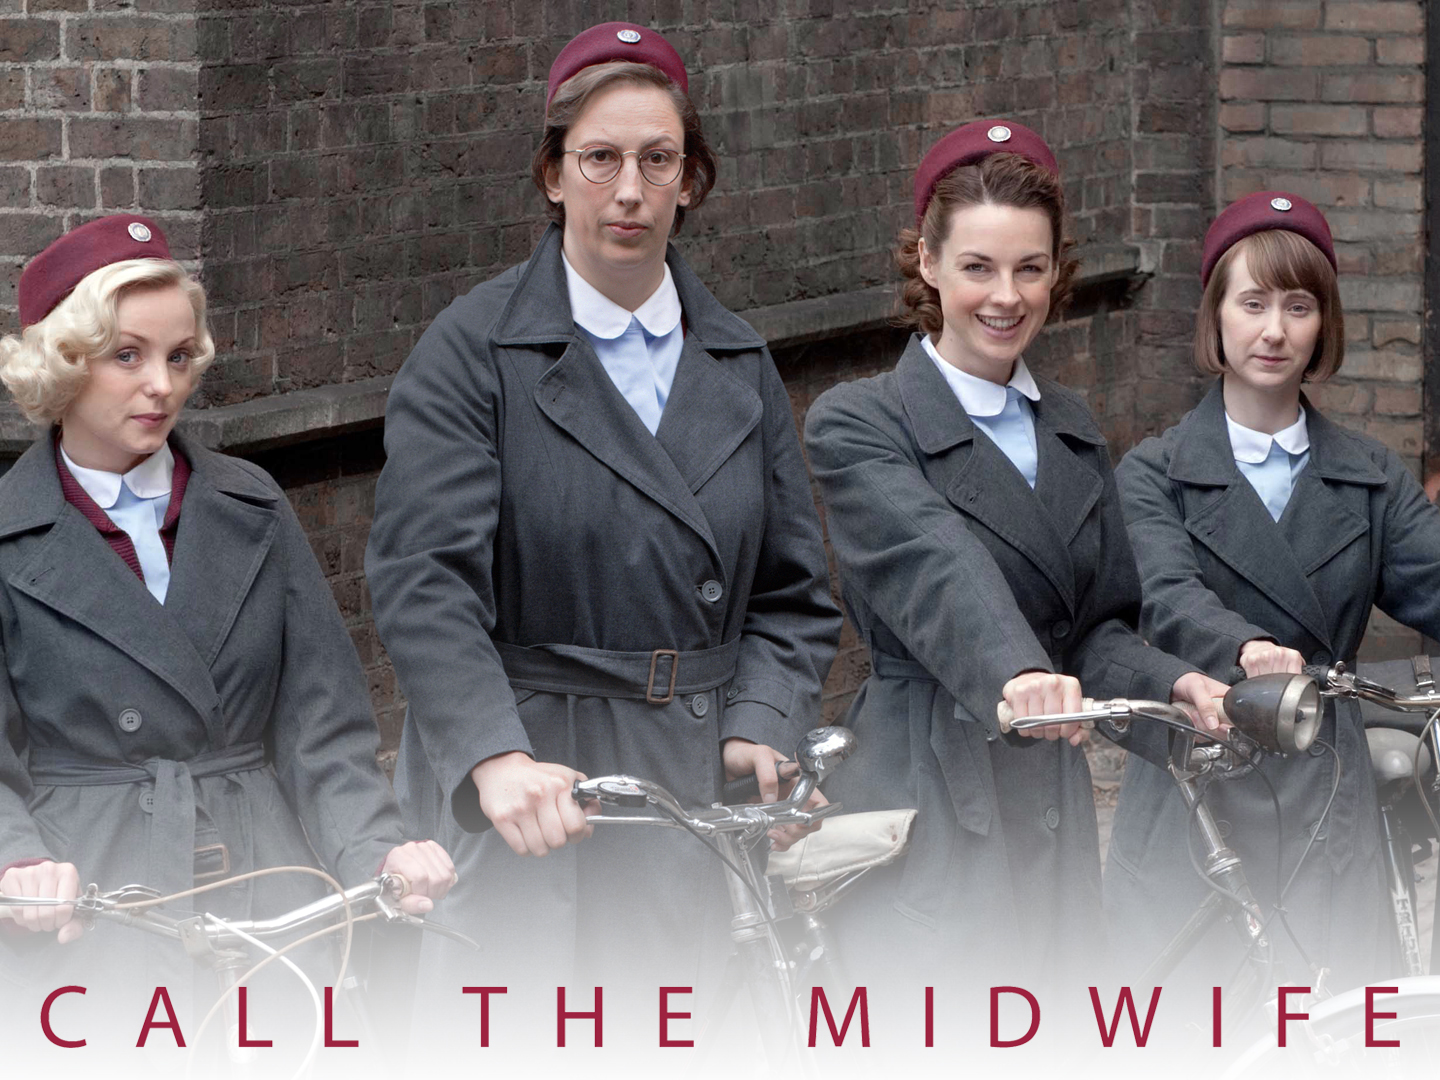 Call the Midwife The Midwife achtergrond